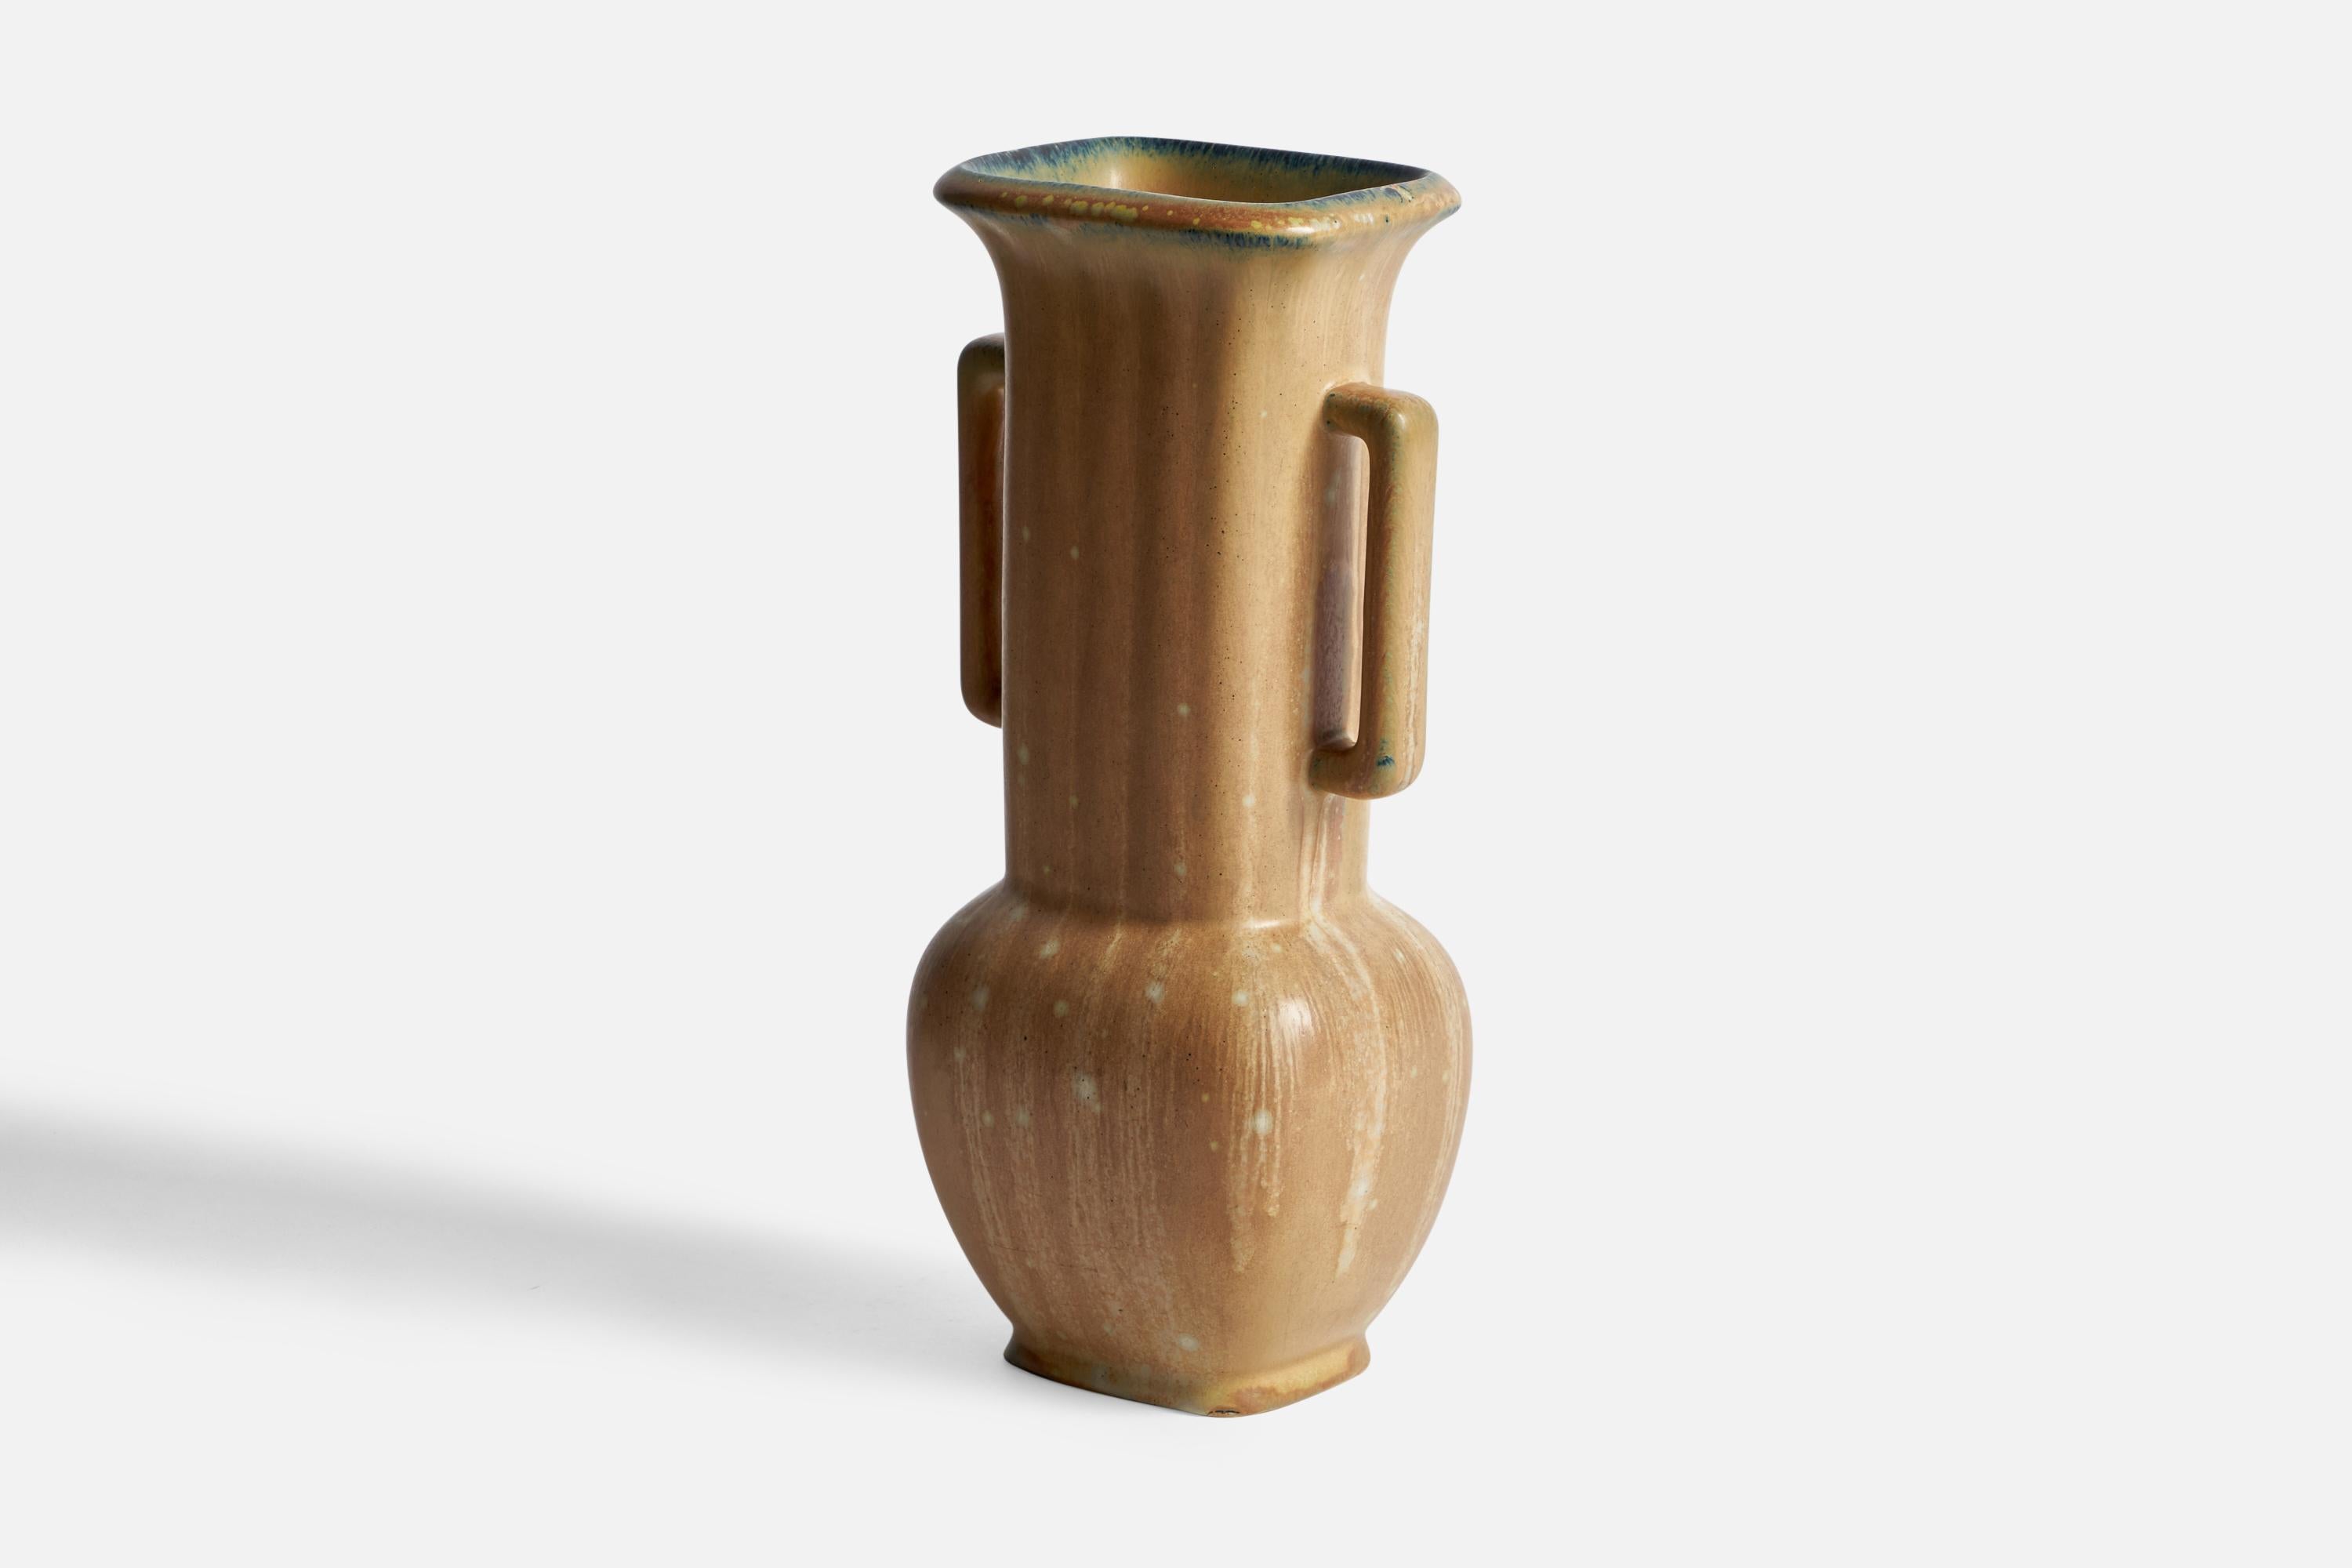 A beige-glazed fluted stoneware vase designed by Gunnar Nylund and produced by Rörstrand, Sweden, 1940s.